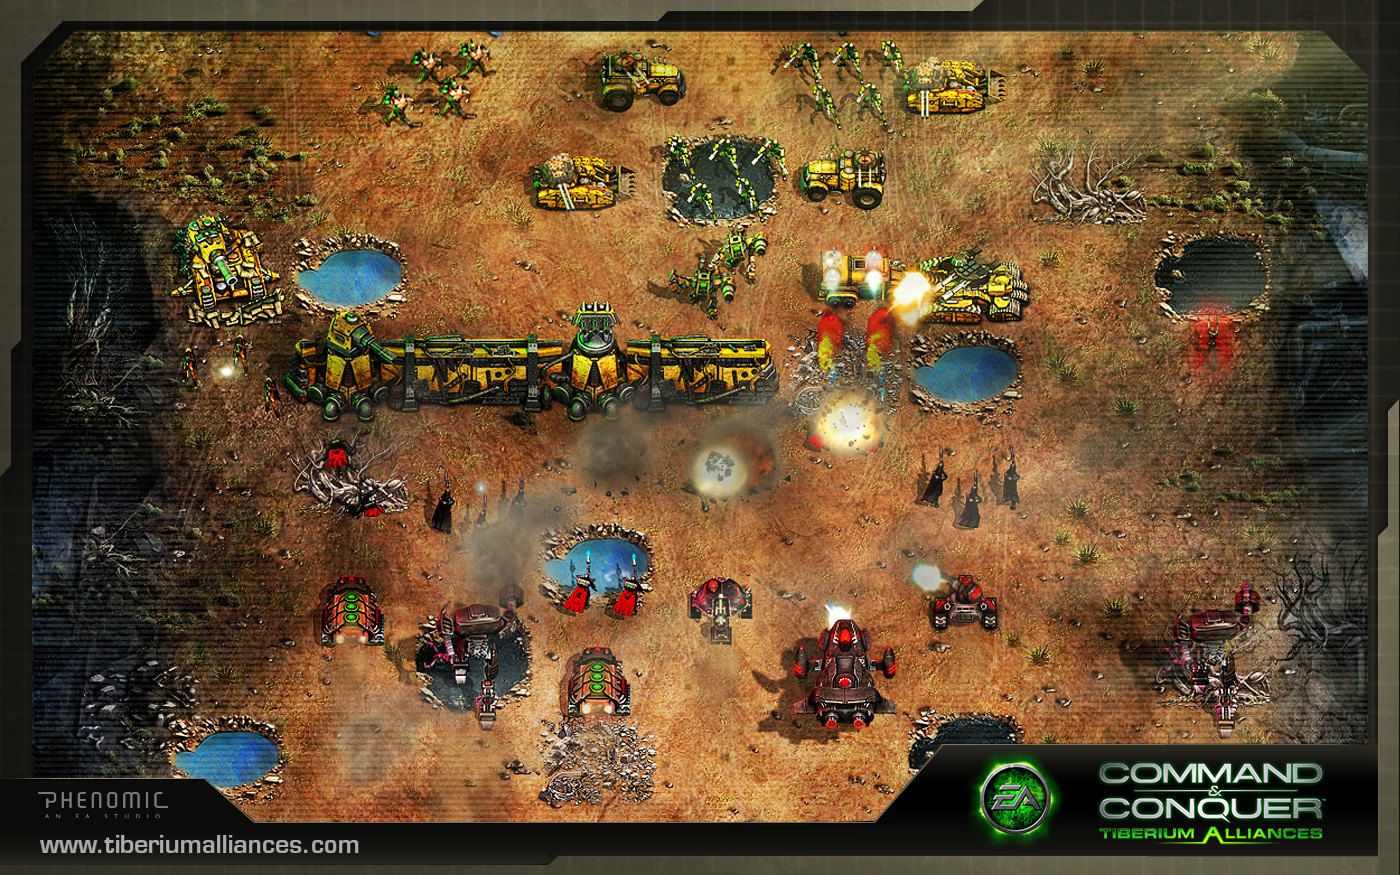 who published command and conquer